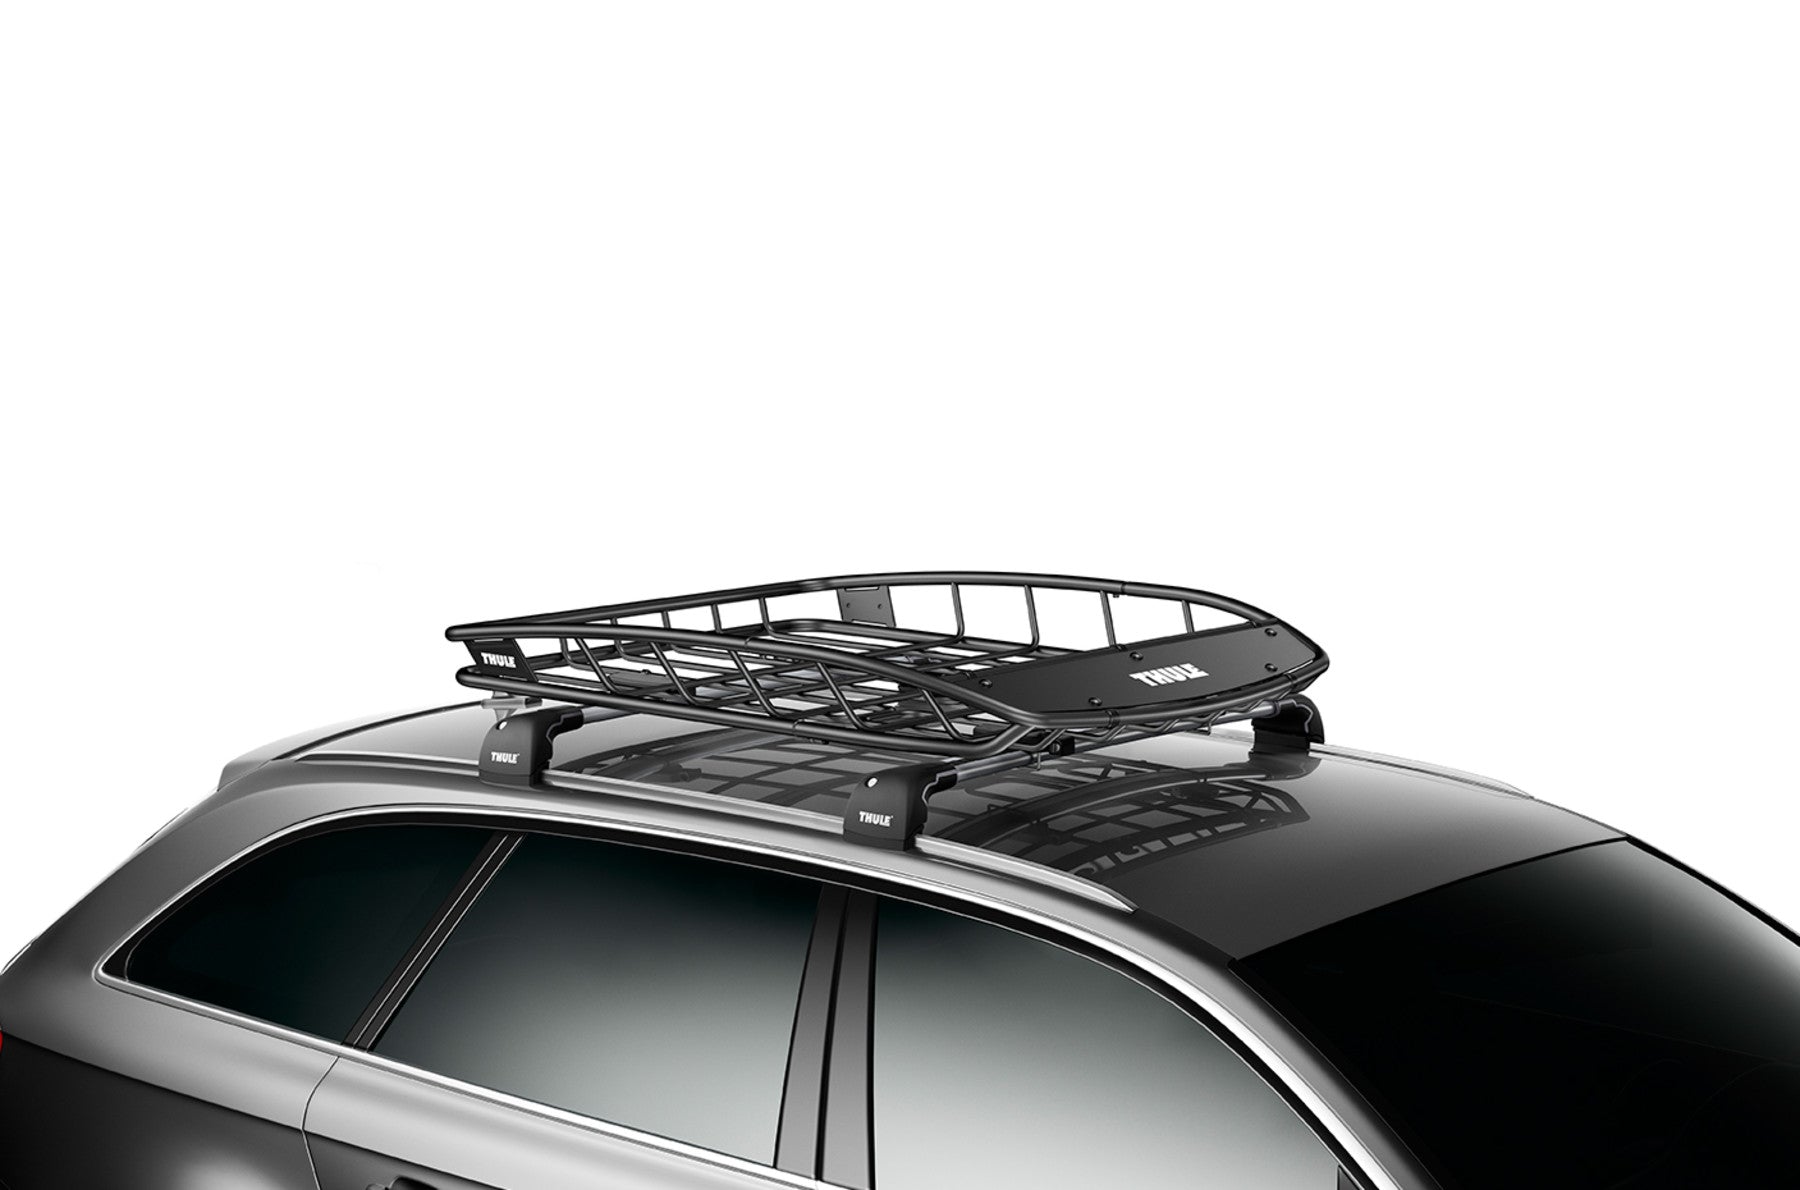 Roof rack systems, Thule